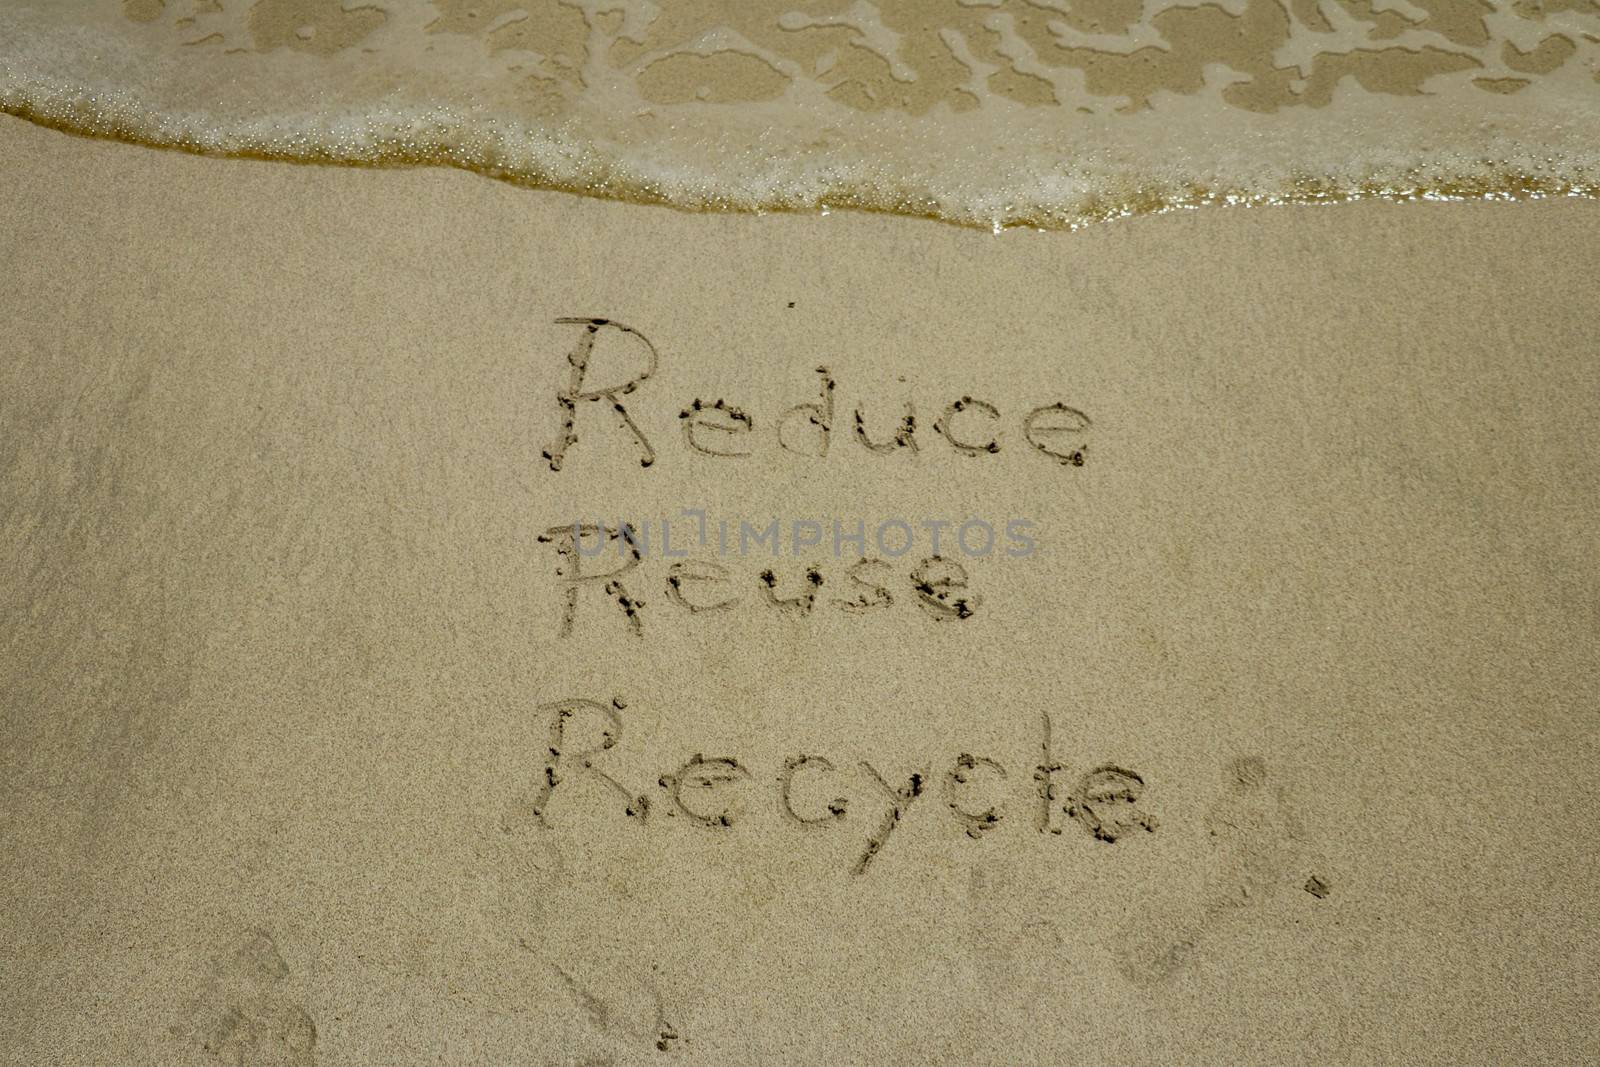 reduce reuse recycle concept drawn on sand, sustainability by Sanatana2008